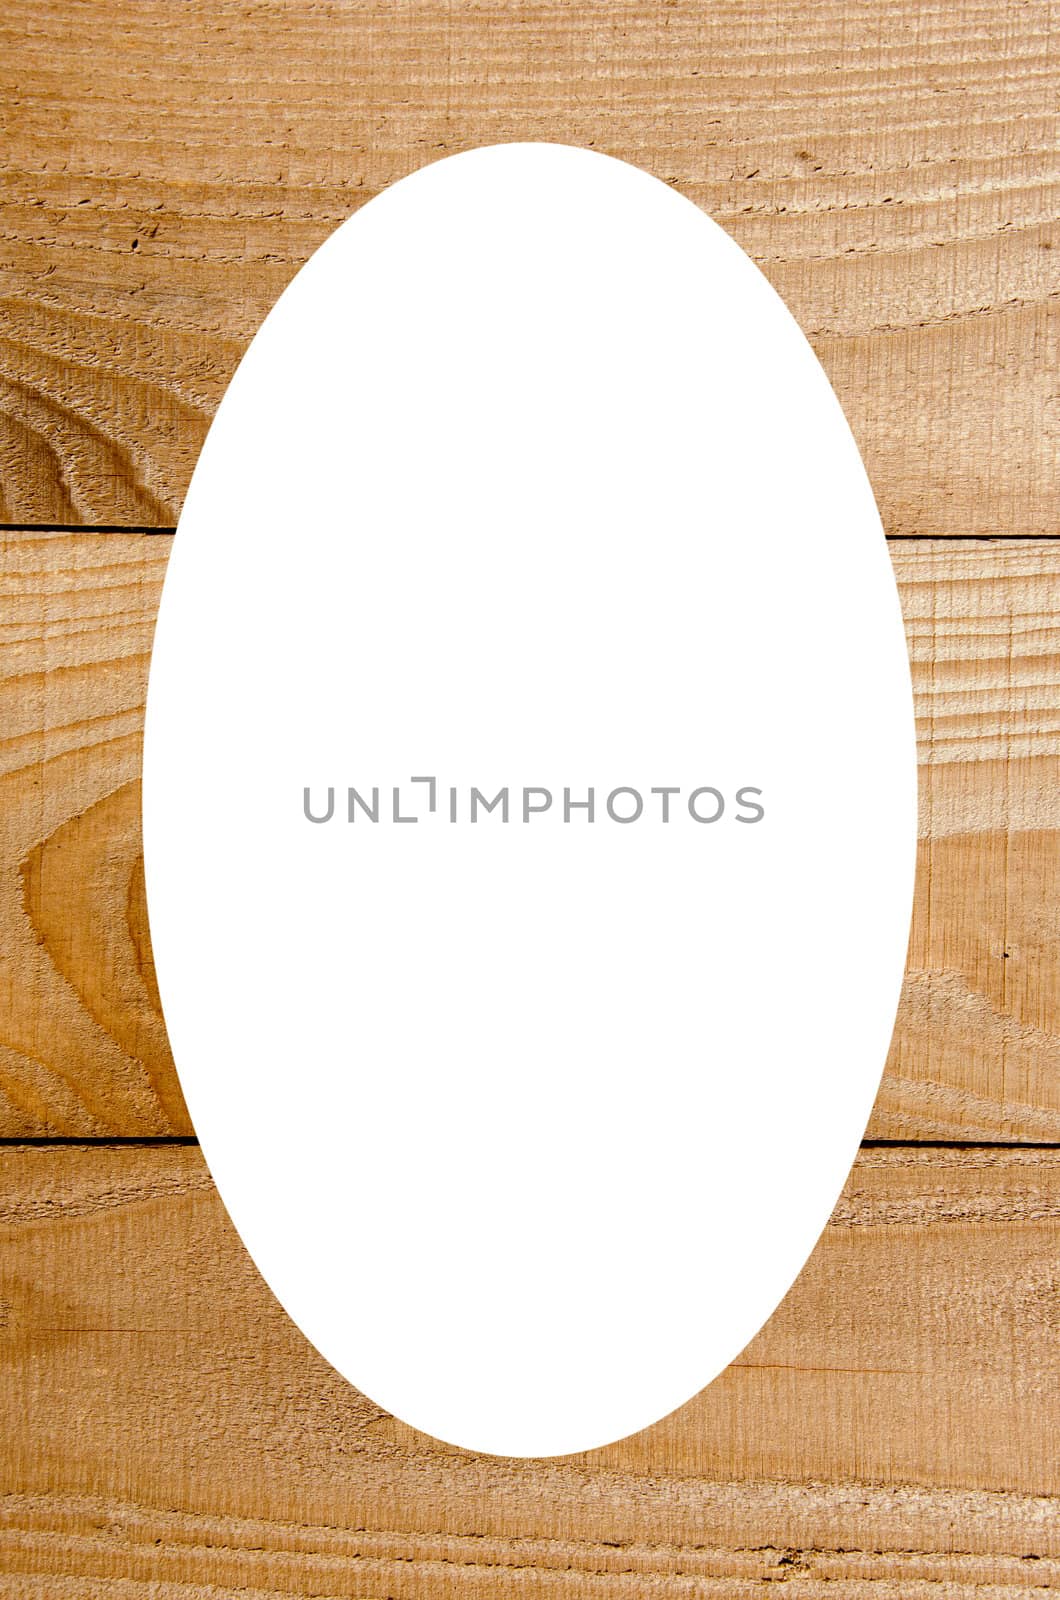 Wooden wall boards and white oval in center by sauletas